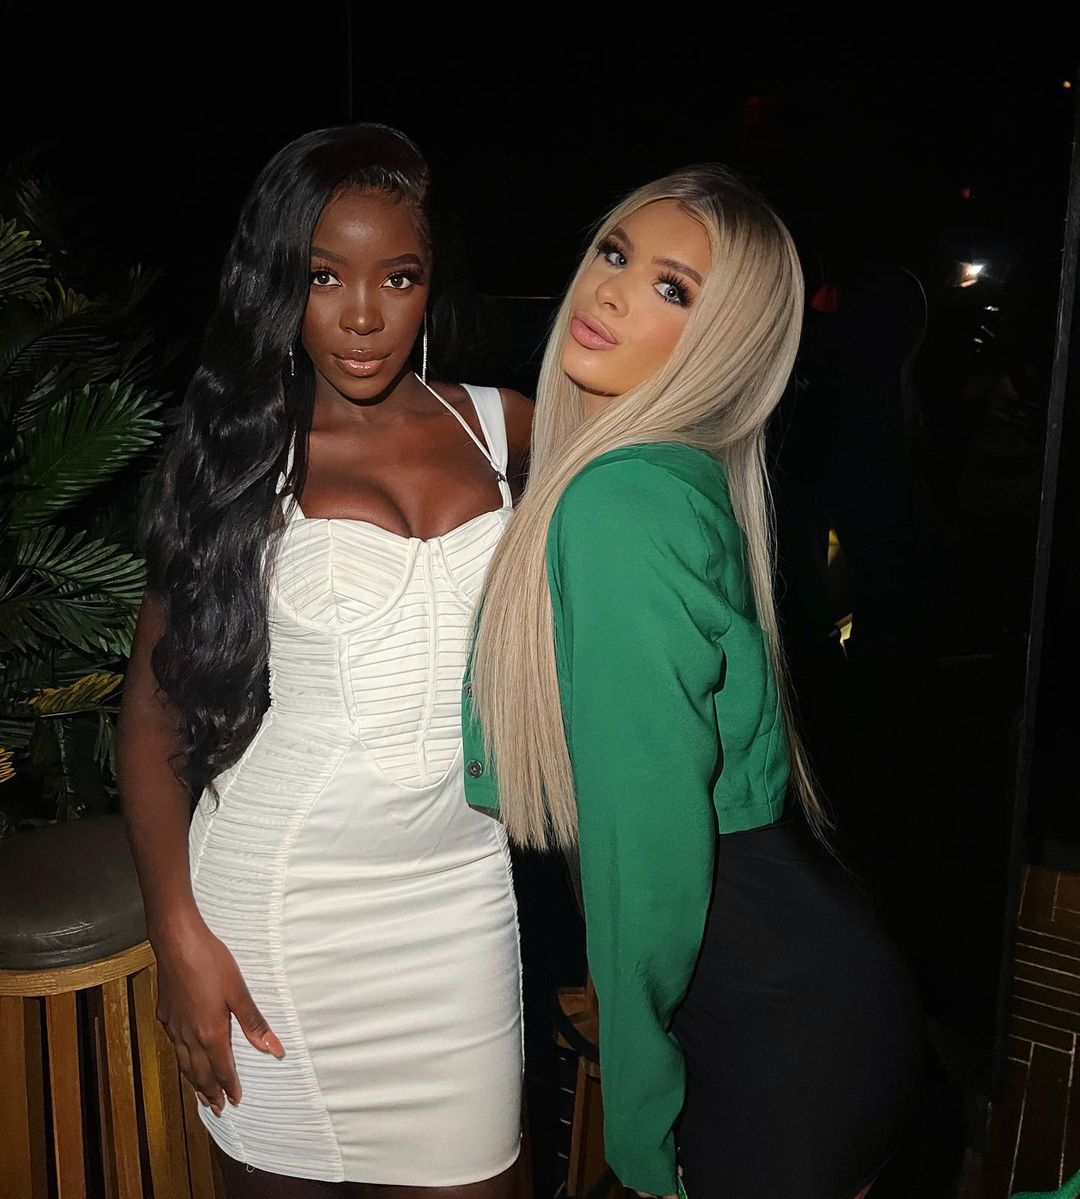 Liberty and Kaz became BFFs after meeting in the Love Island villa last summer